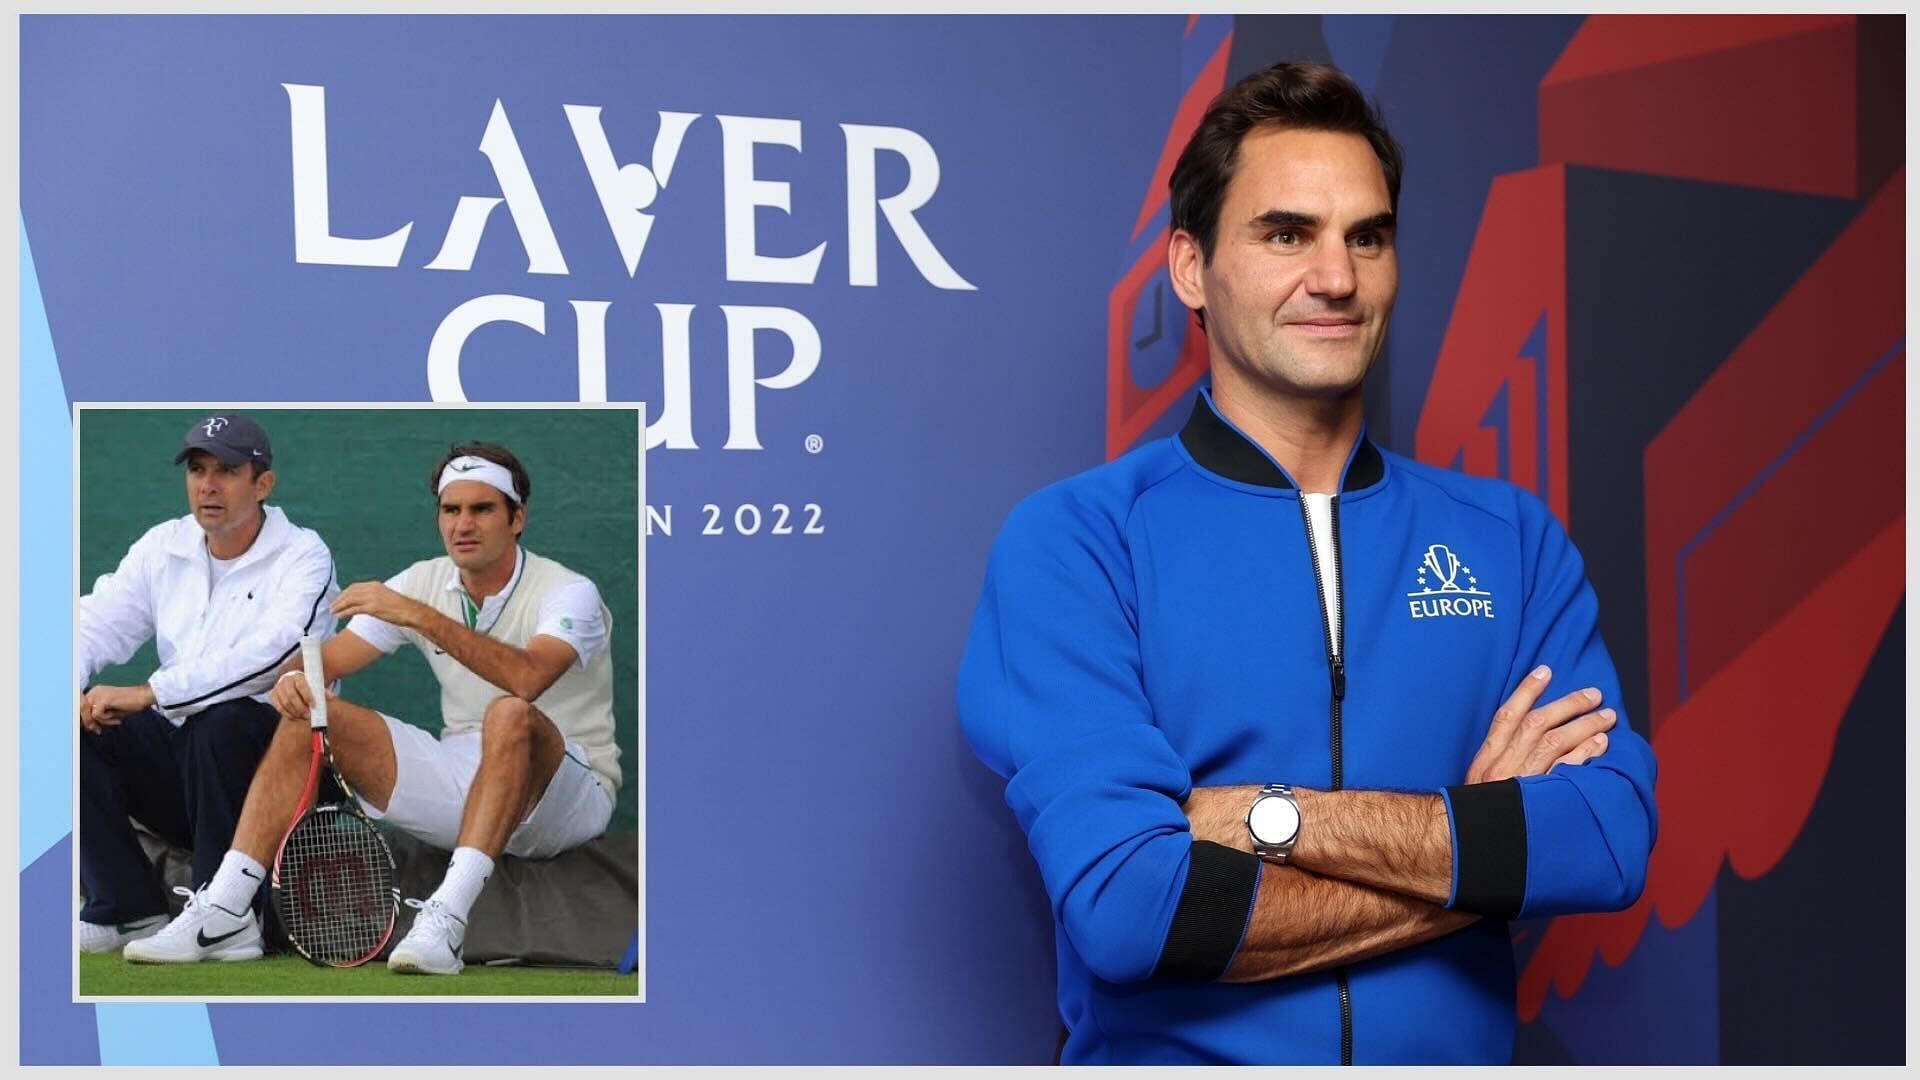 Roger Federer with his former coach Paul Annacone (inset)